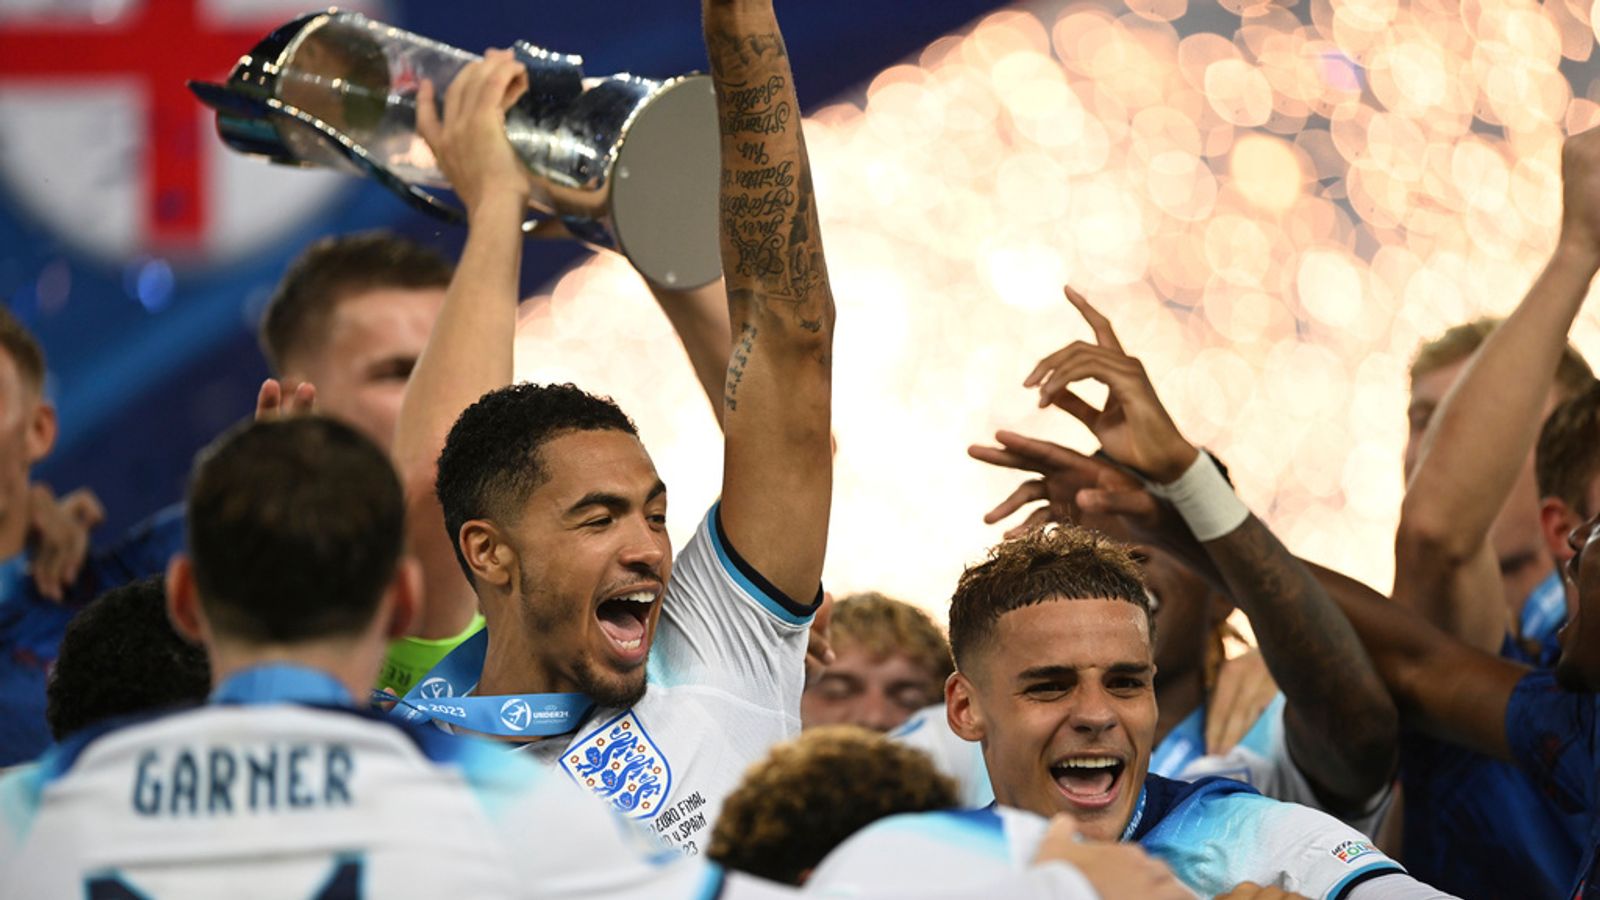 England win European Under-21 Championship with 1-0 victory over Spain